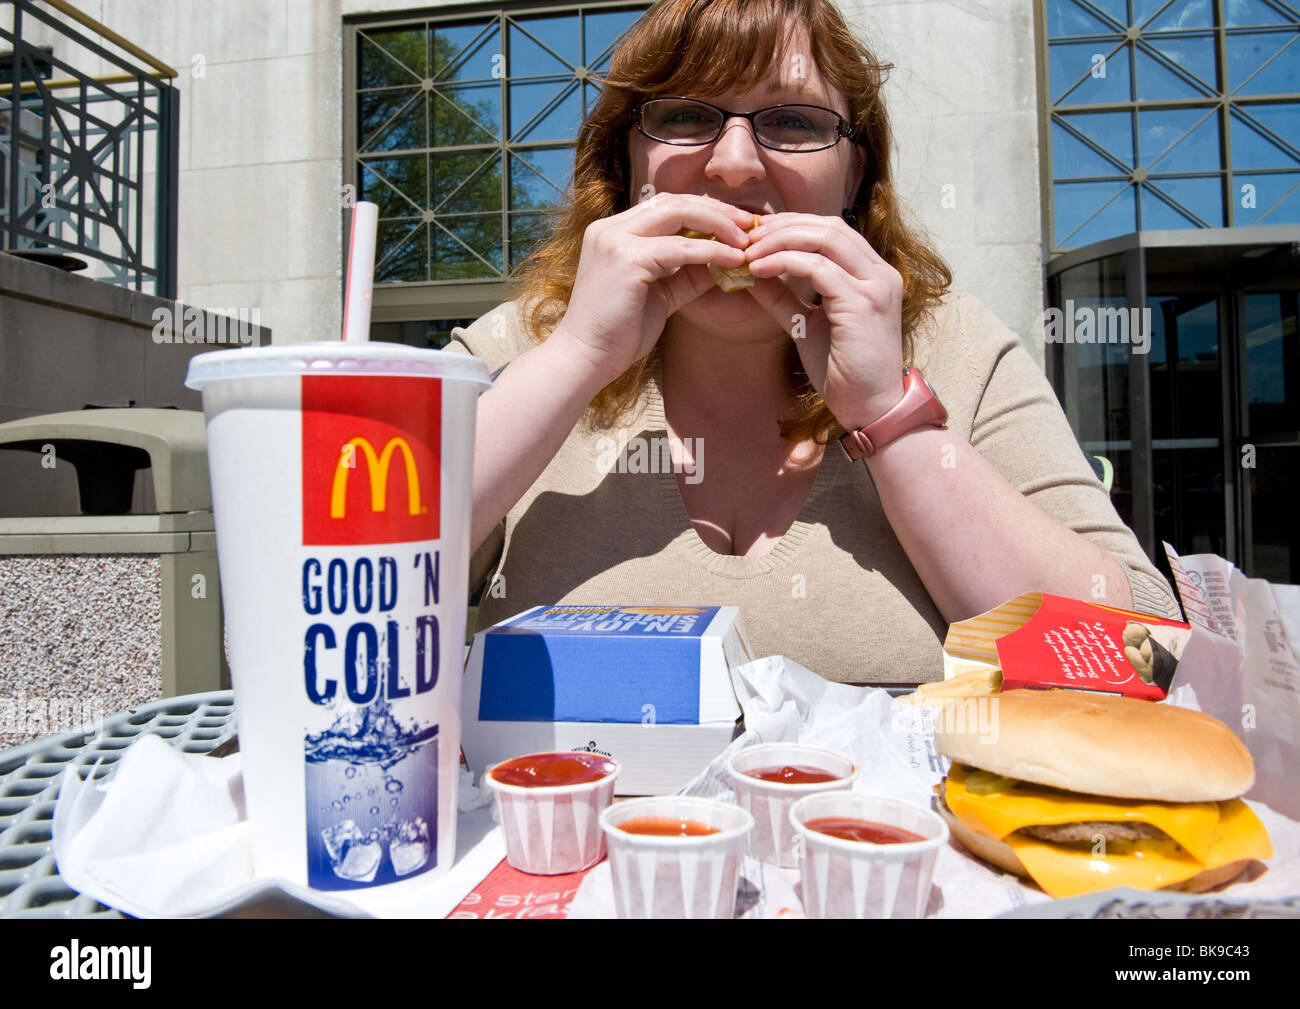 Overweight woman eating McDonald's fast food meal Stock Photo - Alamy